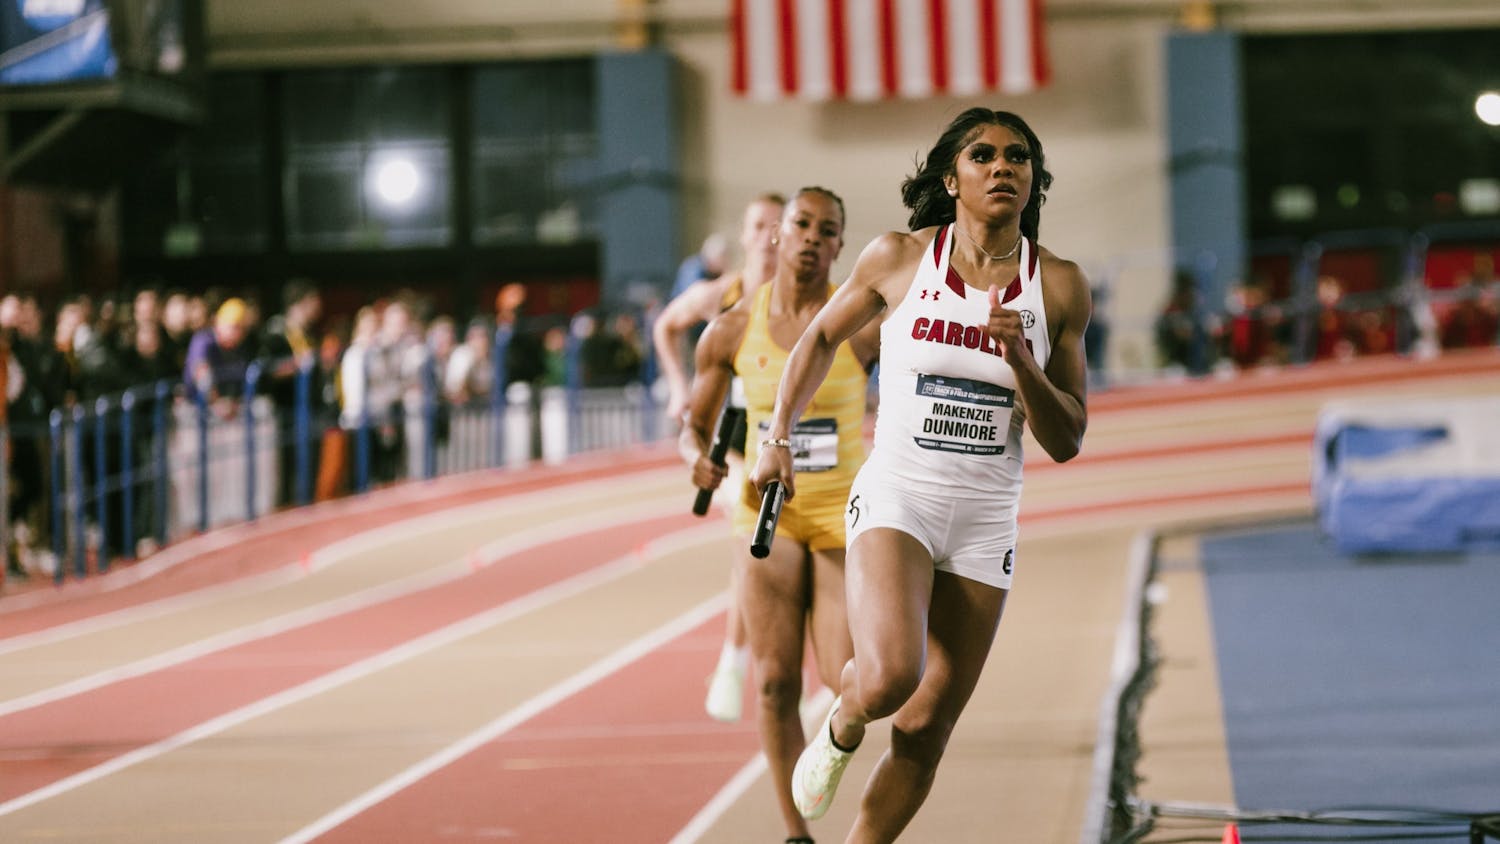 Senior sprinter Makenzie Dunmore races along with USC Track &amp; Field while competing at the 2022 D1 Indoor Nationals at the CrossPlex in Birmingham, A.L., on March 12, 2022.